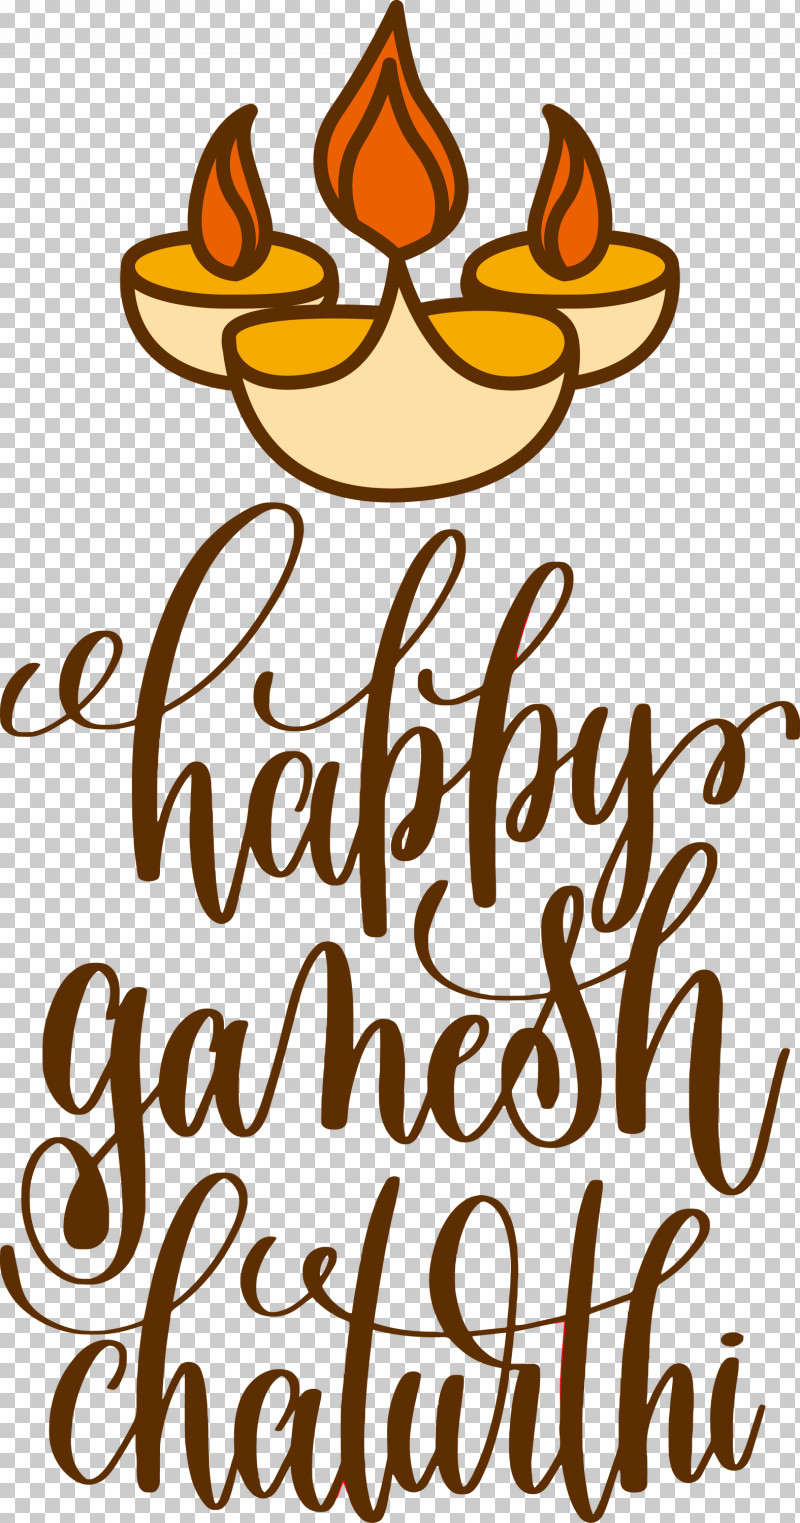 Happy Ganesh Chaturthi PNG, Clipart, Calligraphy, Festival, Happy Ganesh Chaturthi, Lettering, Poster Free PNG Download